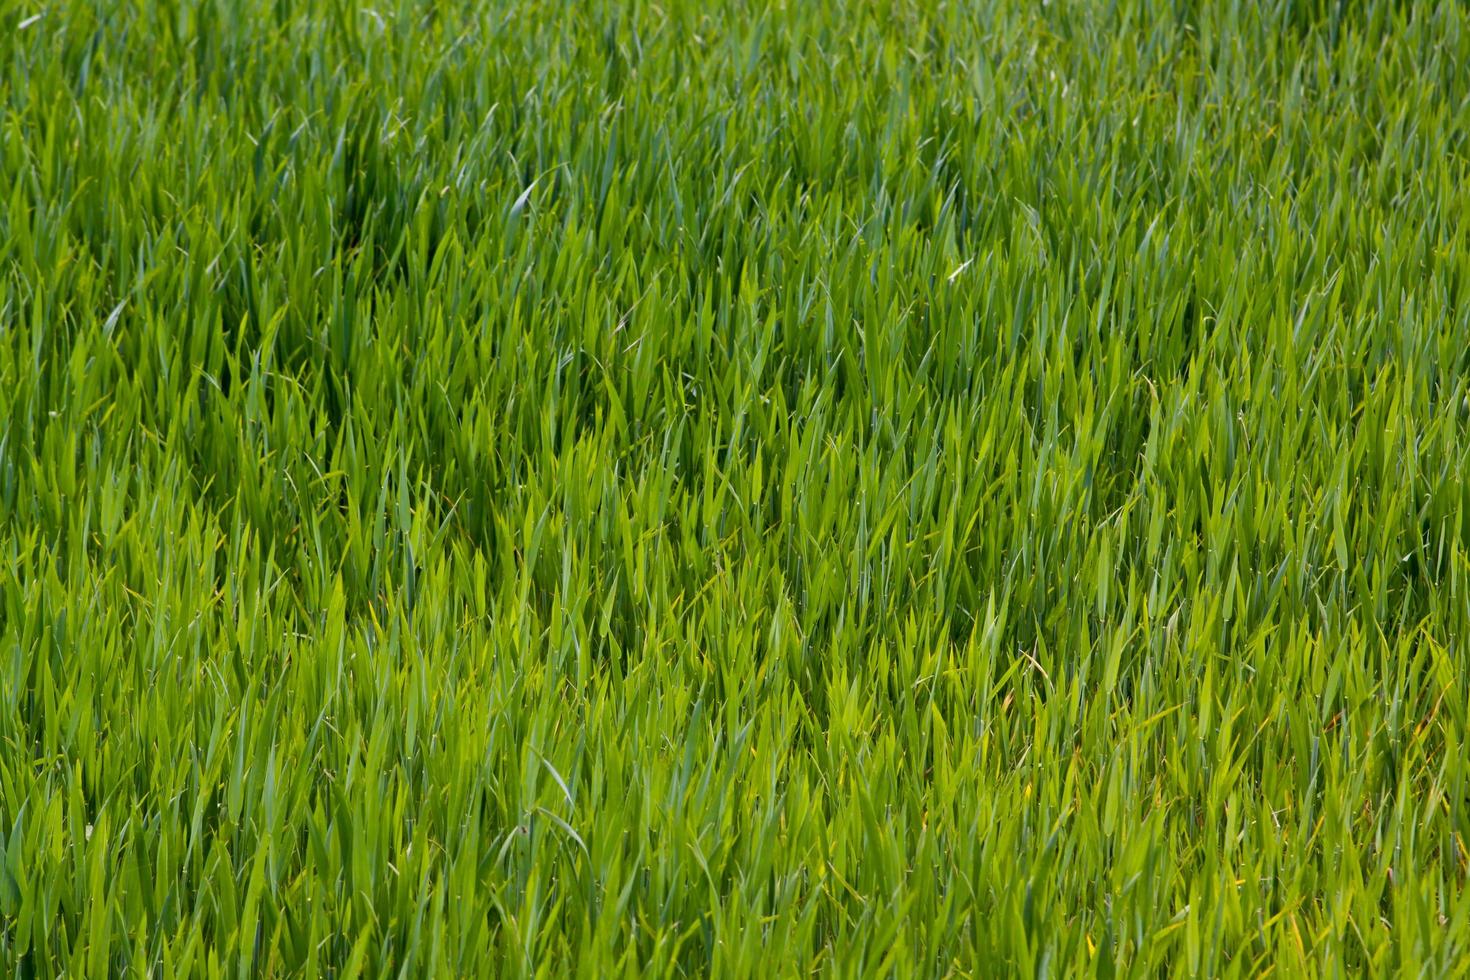 Green grass texture can be use as background photo